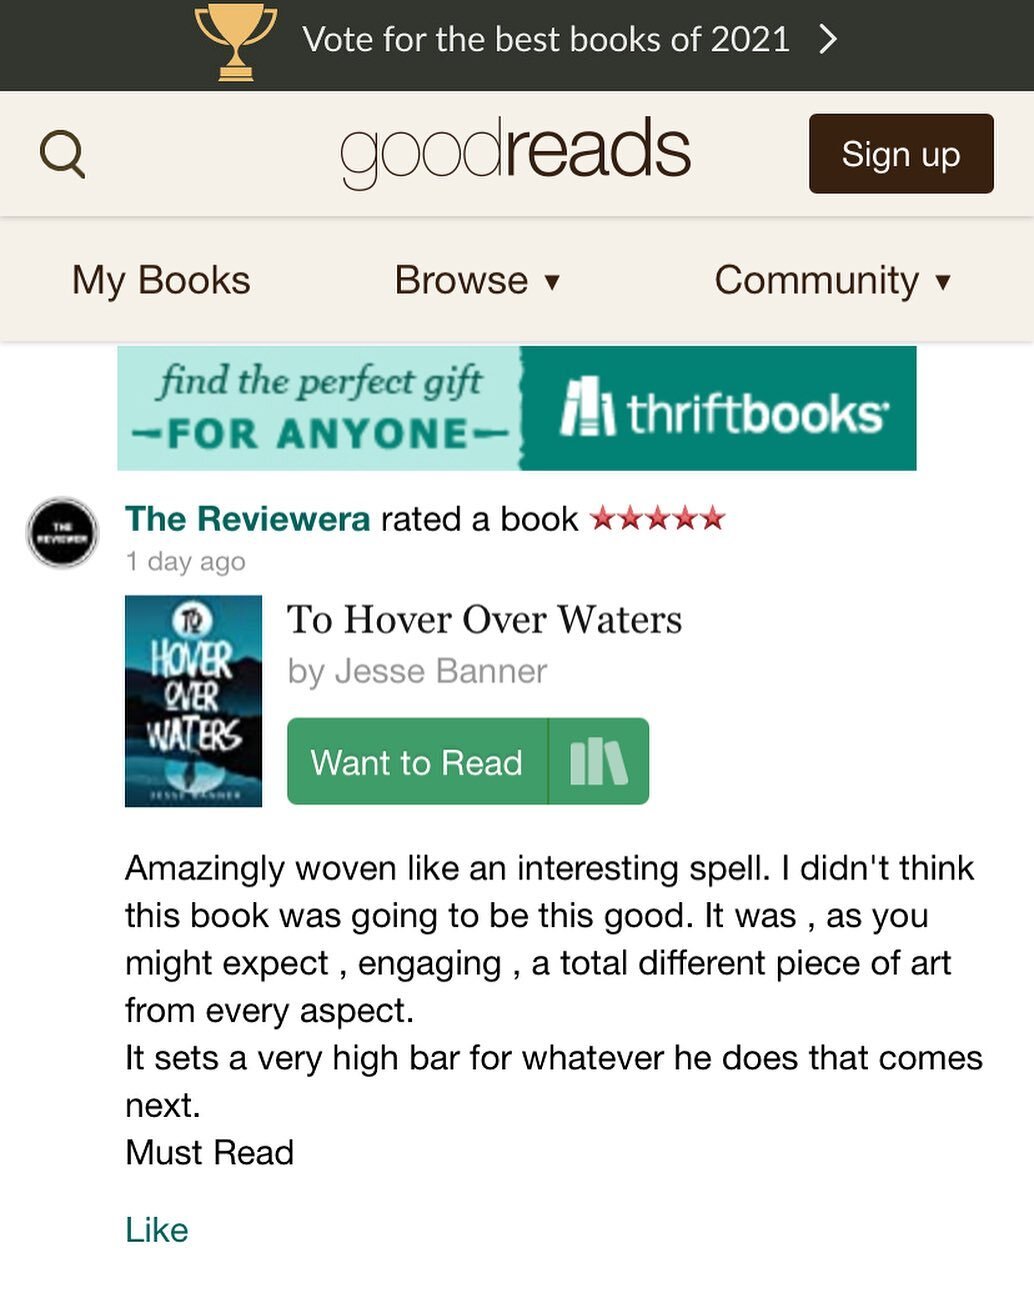 A positive review on goodreads. Much appreciated. #bookofthemonth #bookreview #goodreads #yanovel